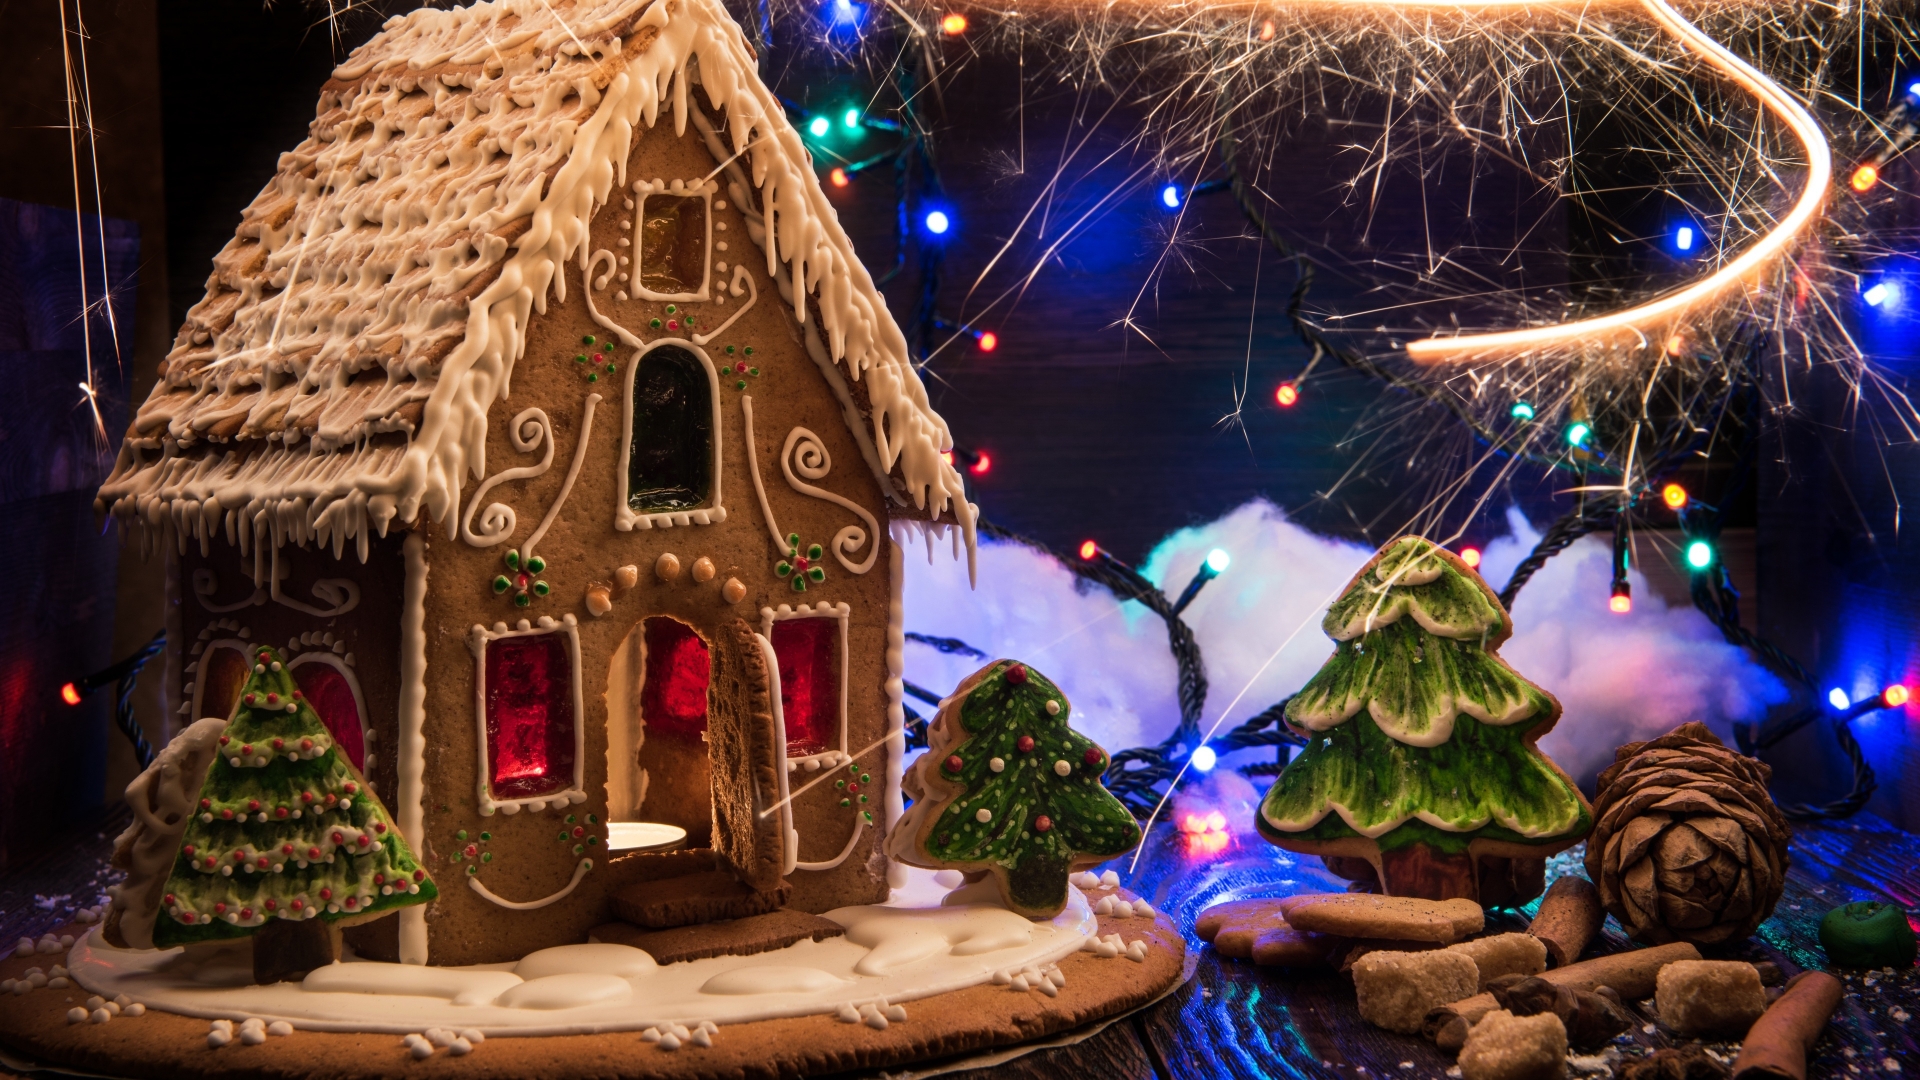 Christmas Gingerbread Decorations for 1920 x 1080 HDTV 1080p resolution